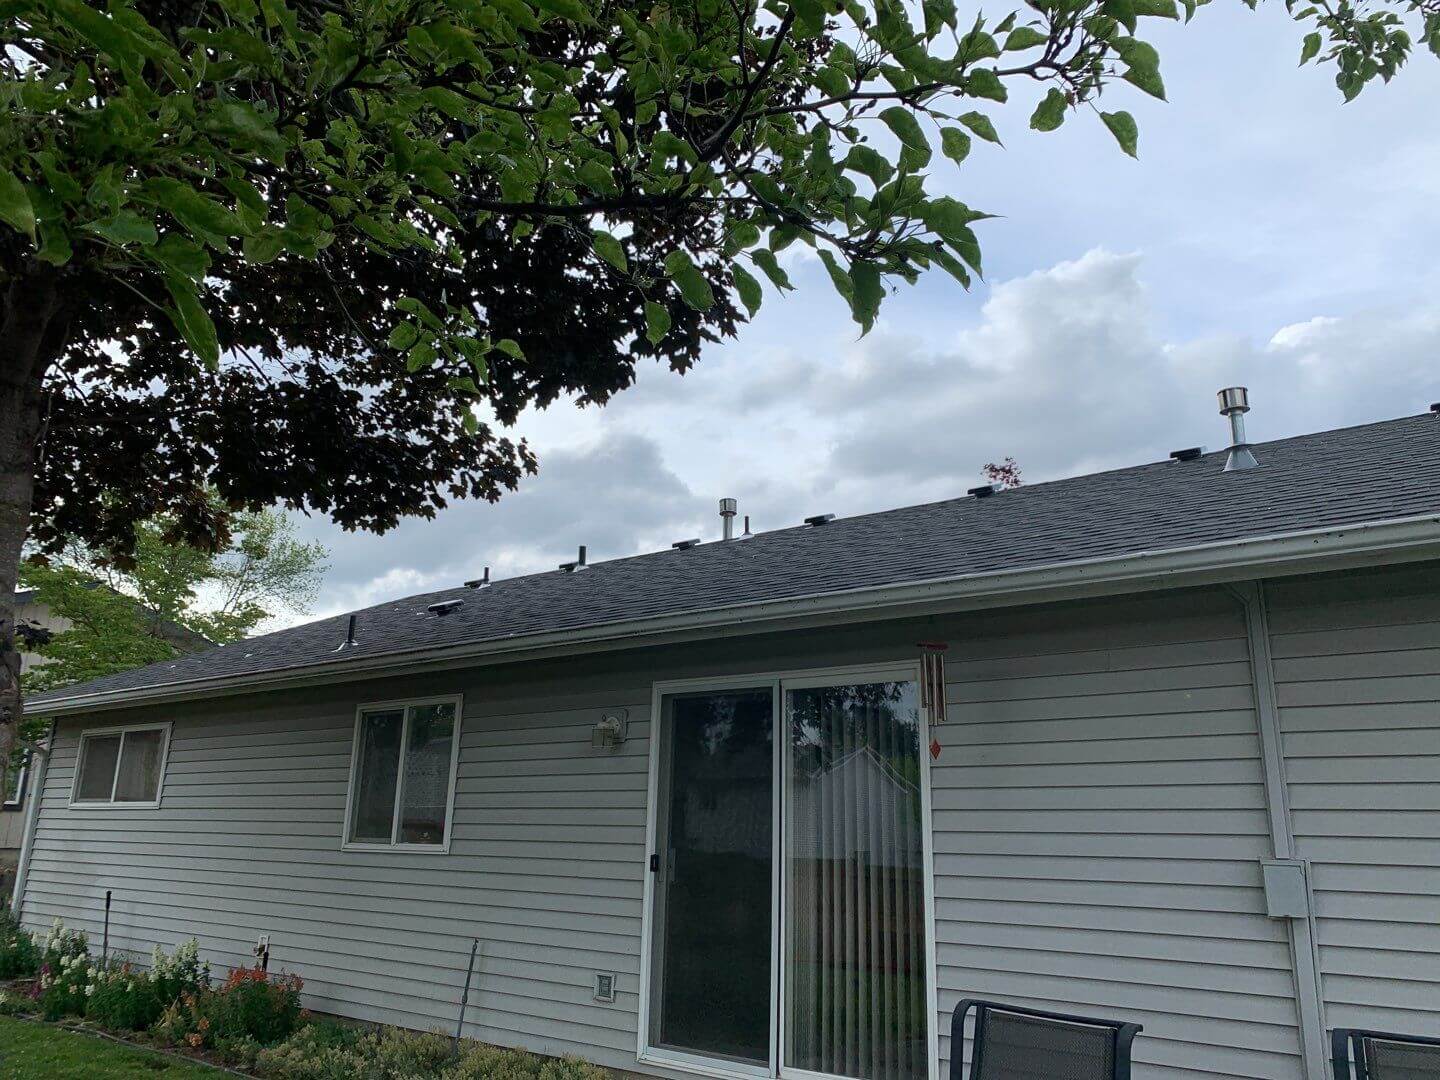 Newly installed roof with metal vents